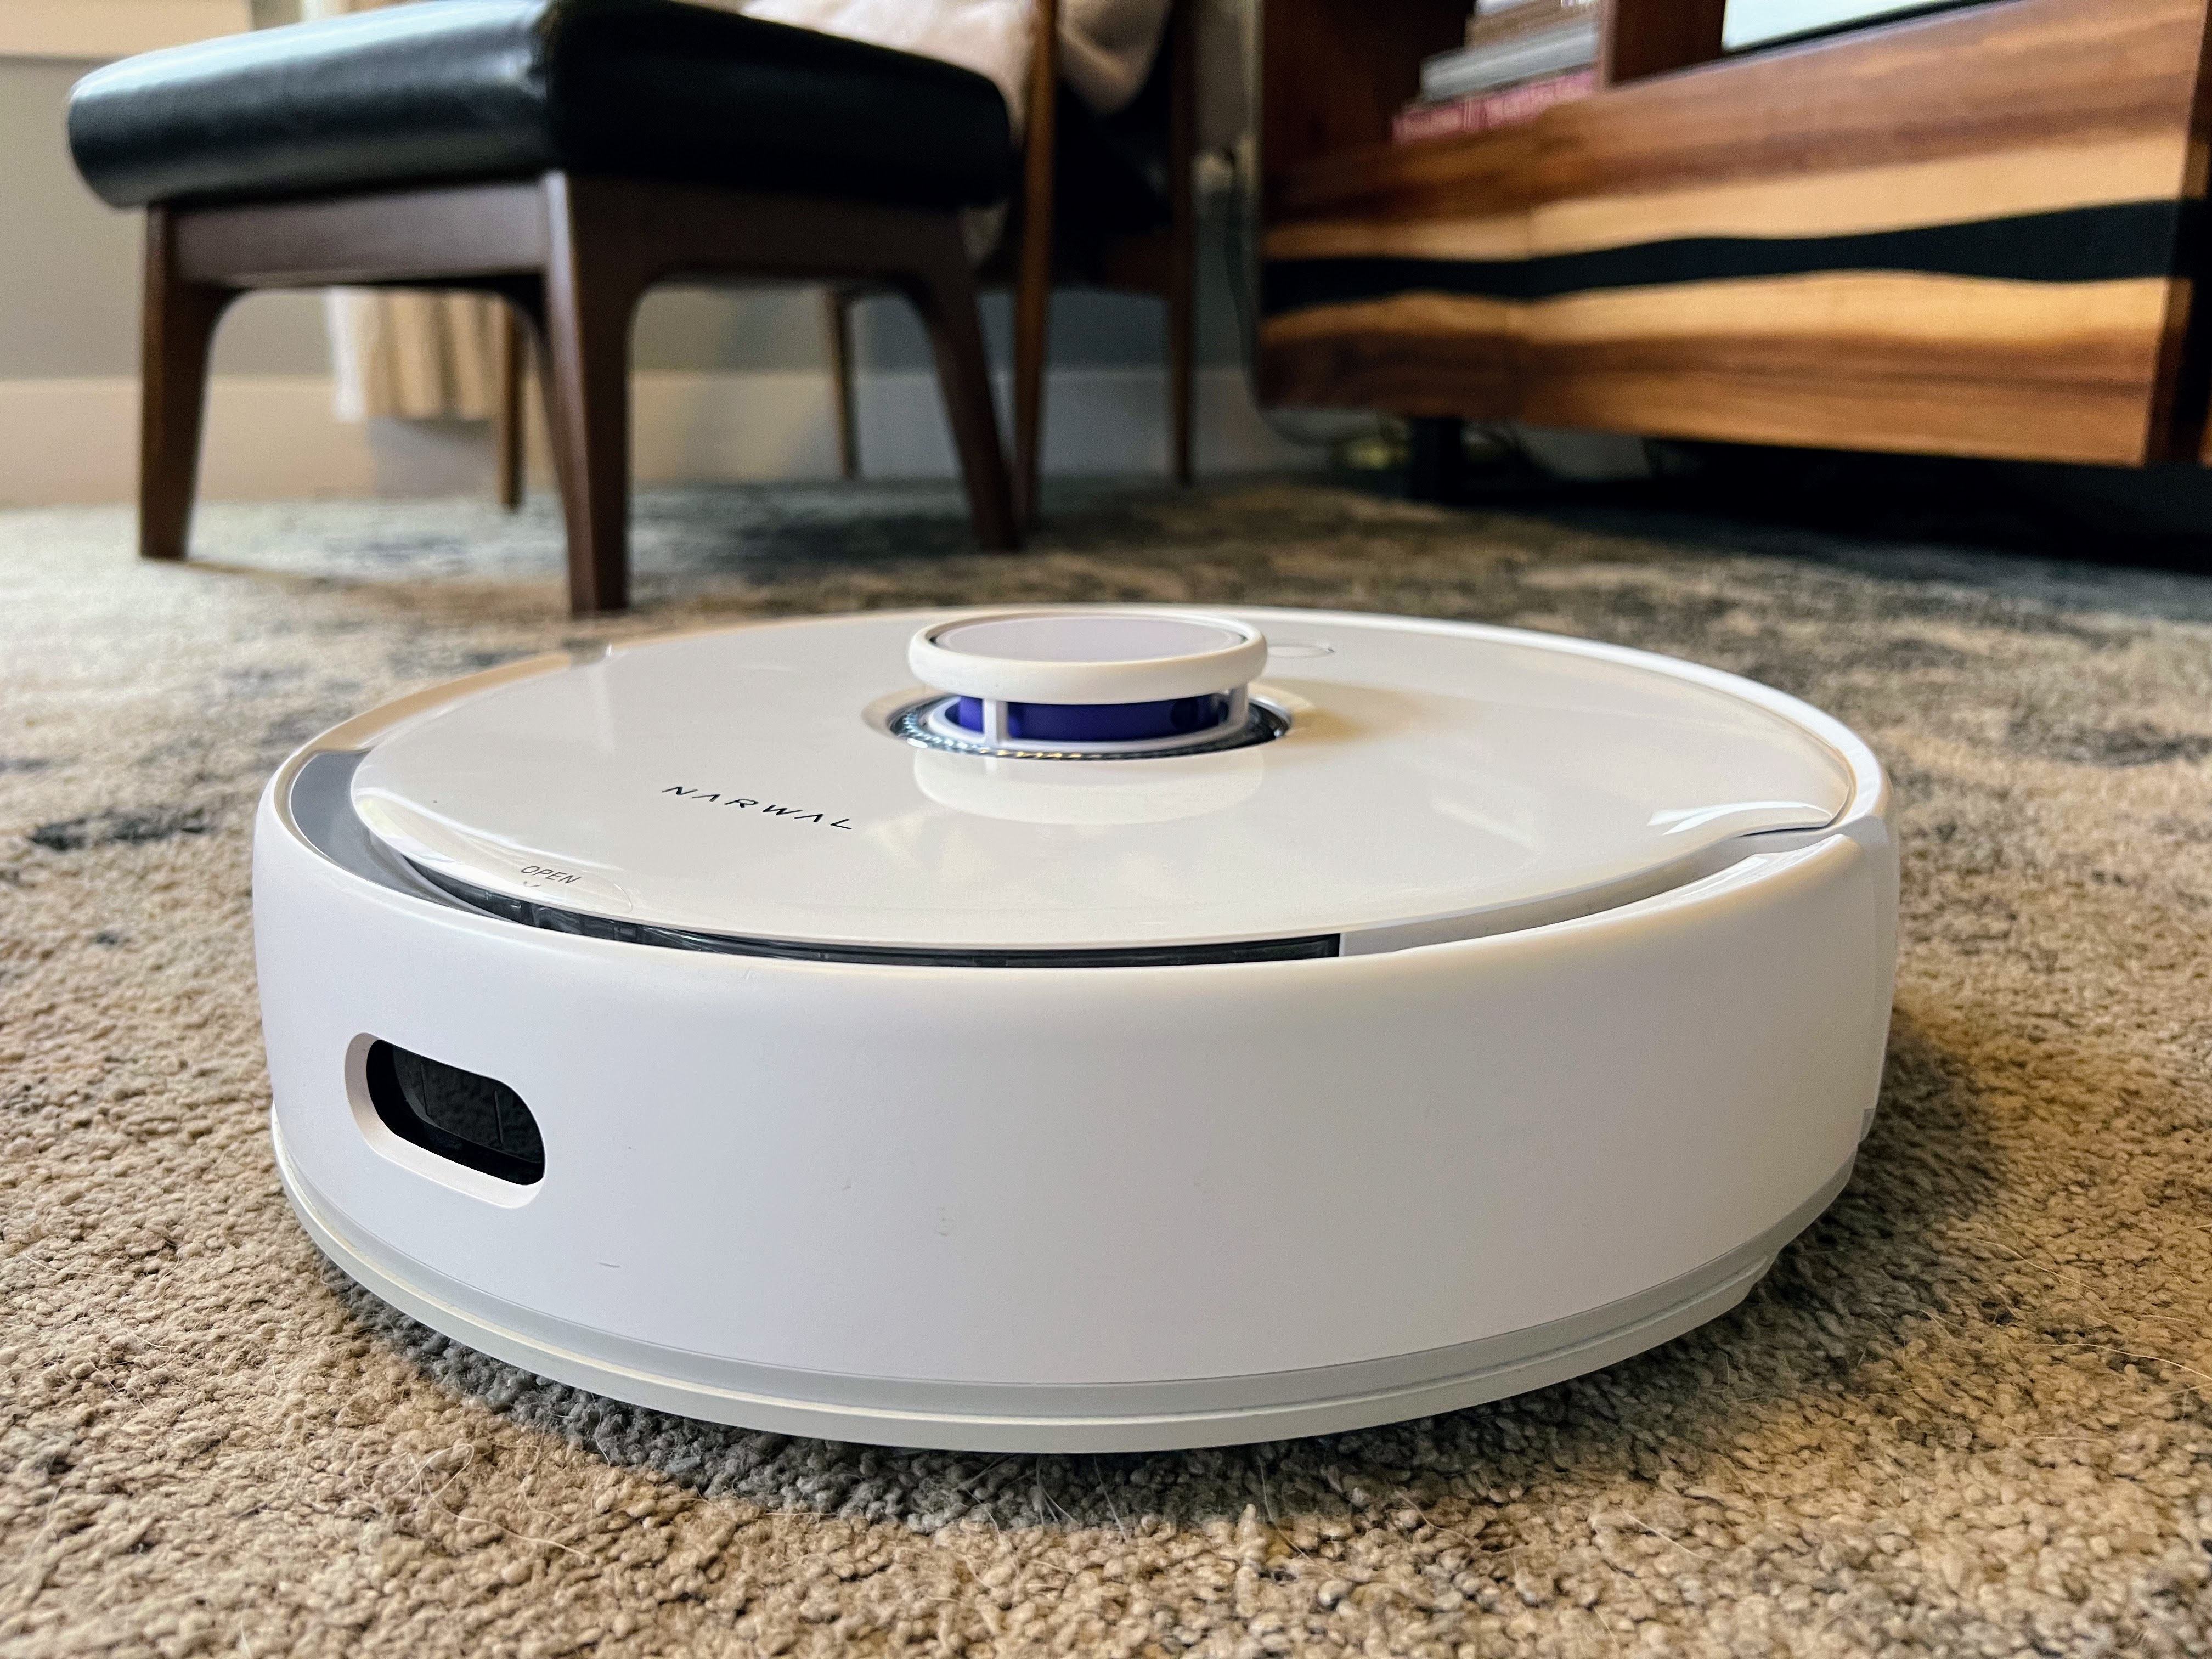 Best Robot Vacuum And Mop Combo: Narwal T10 with self-washing mop